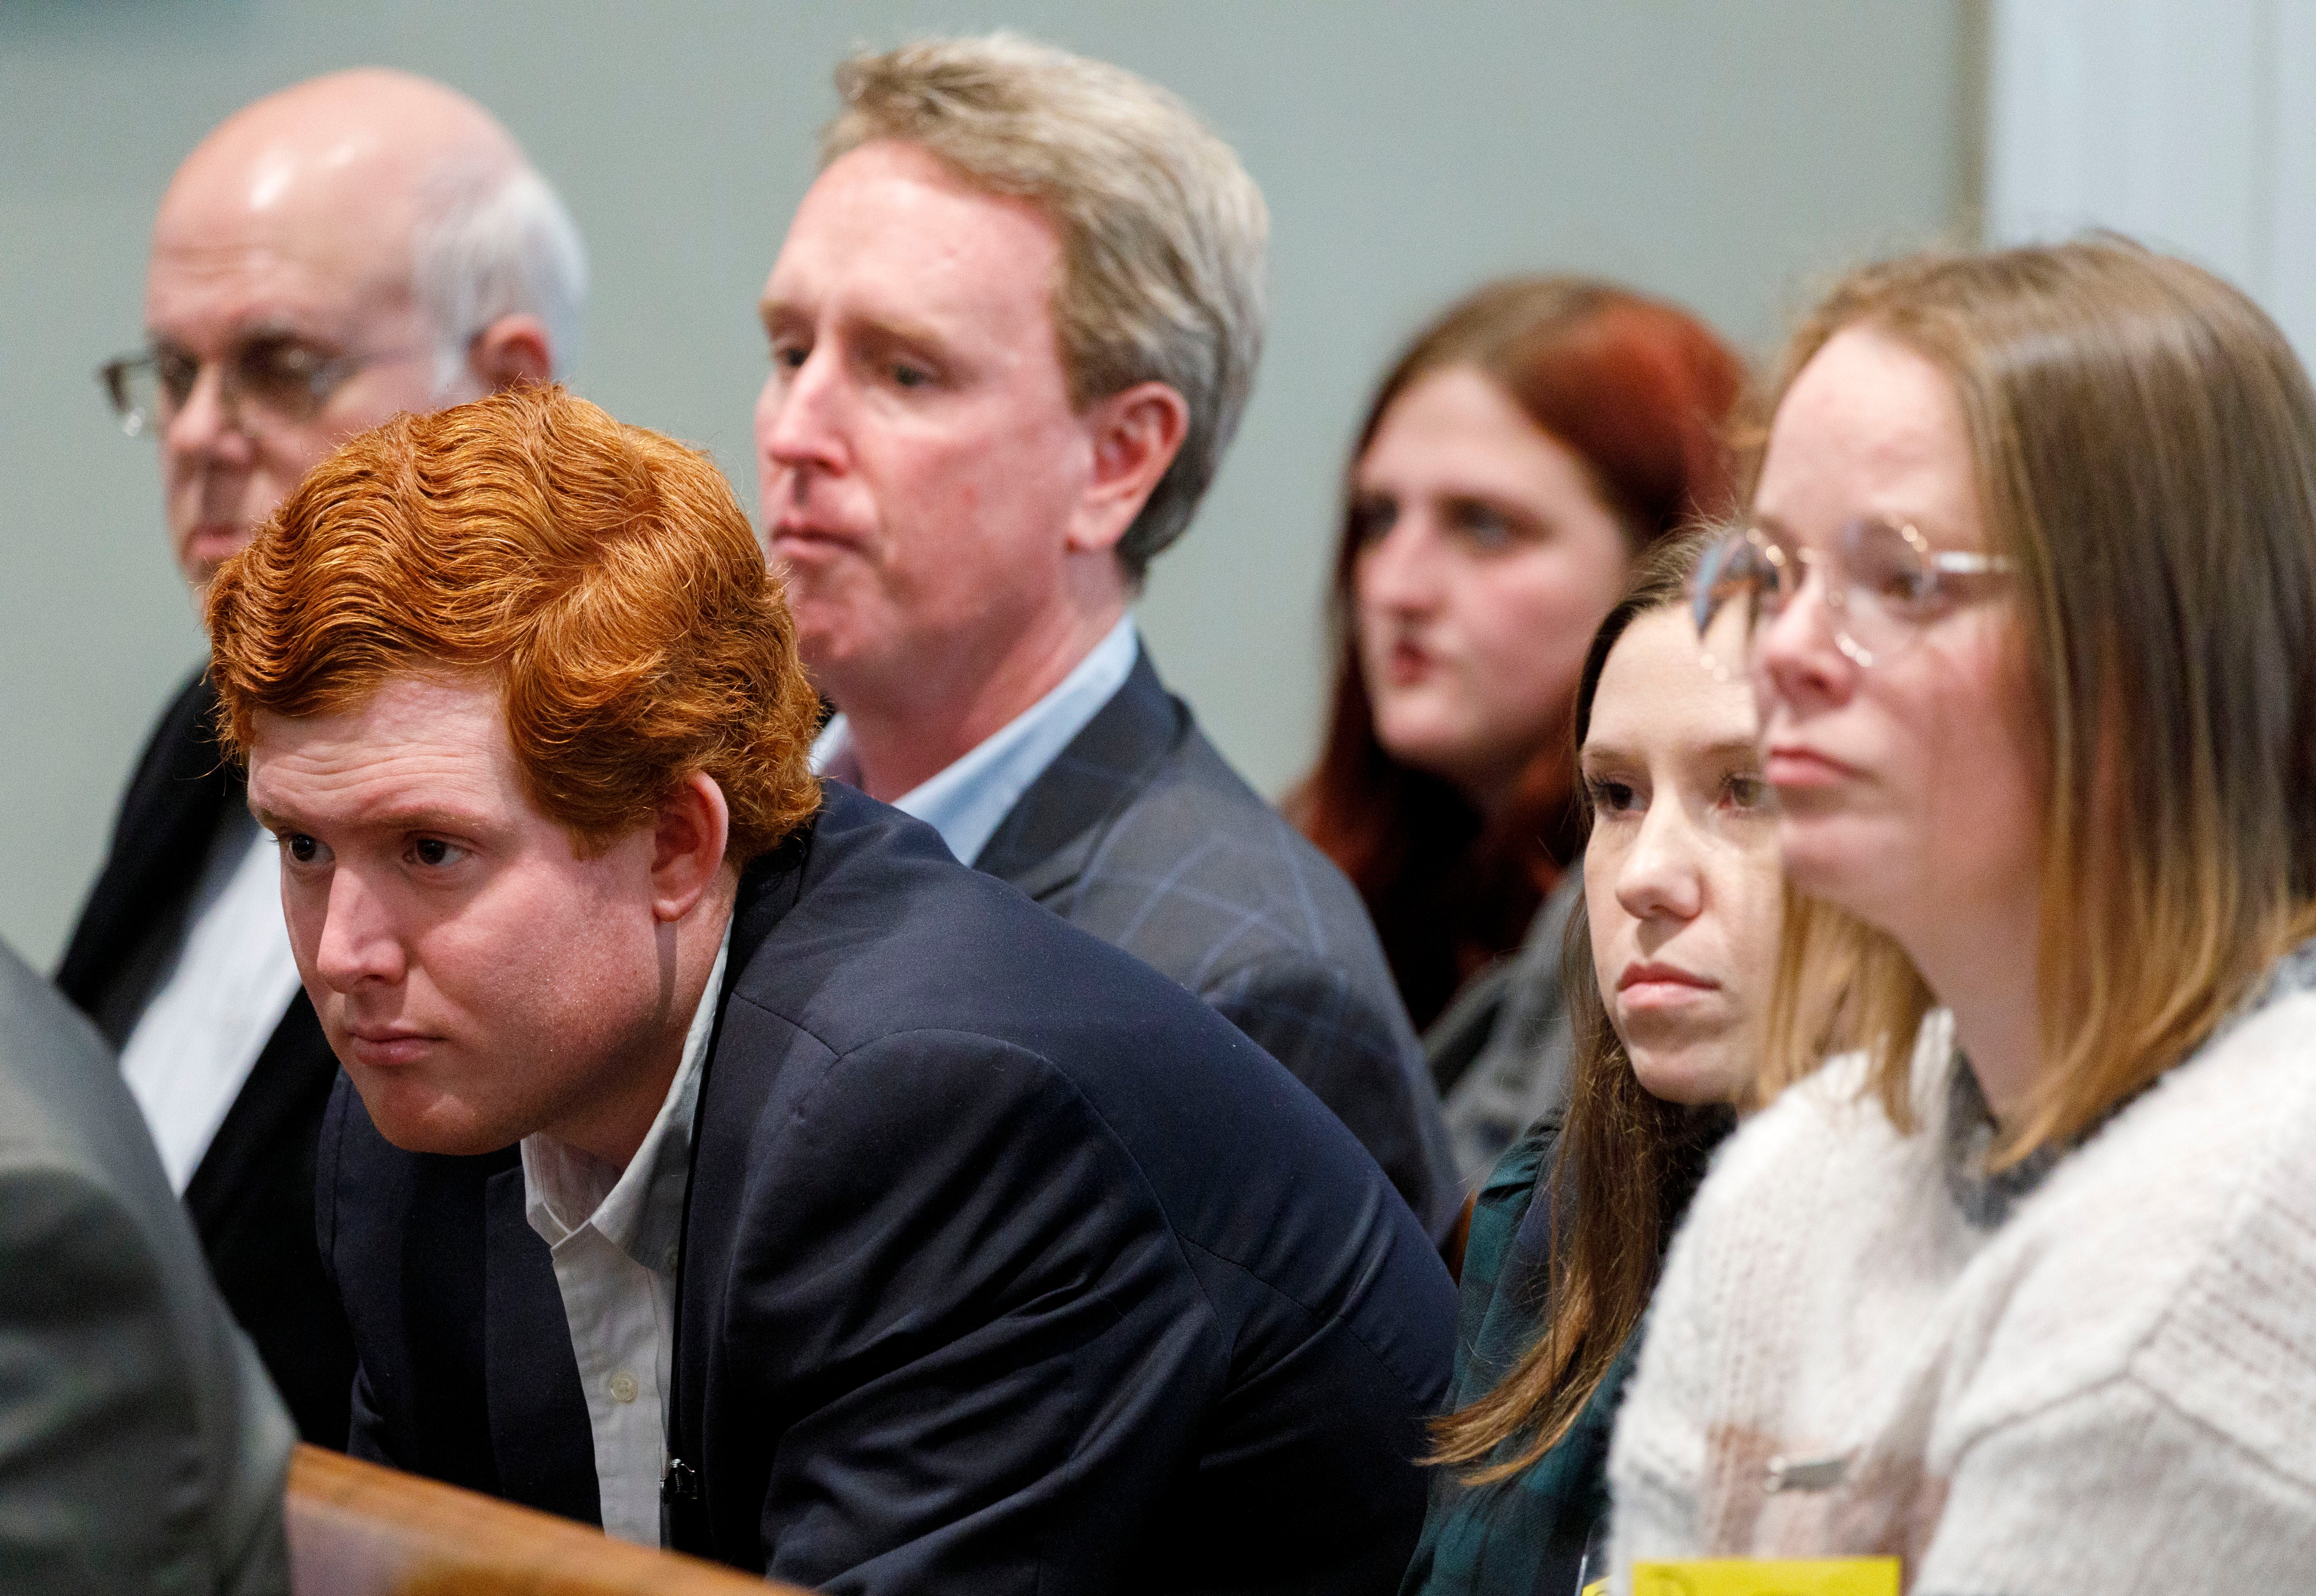 Members of the Murdaugh family, including his son Buster Murdaugh in centre, at the murder trial